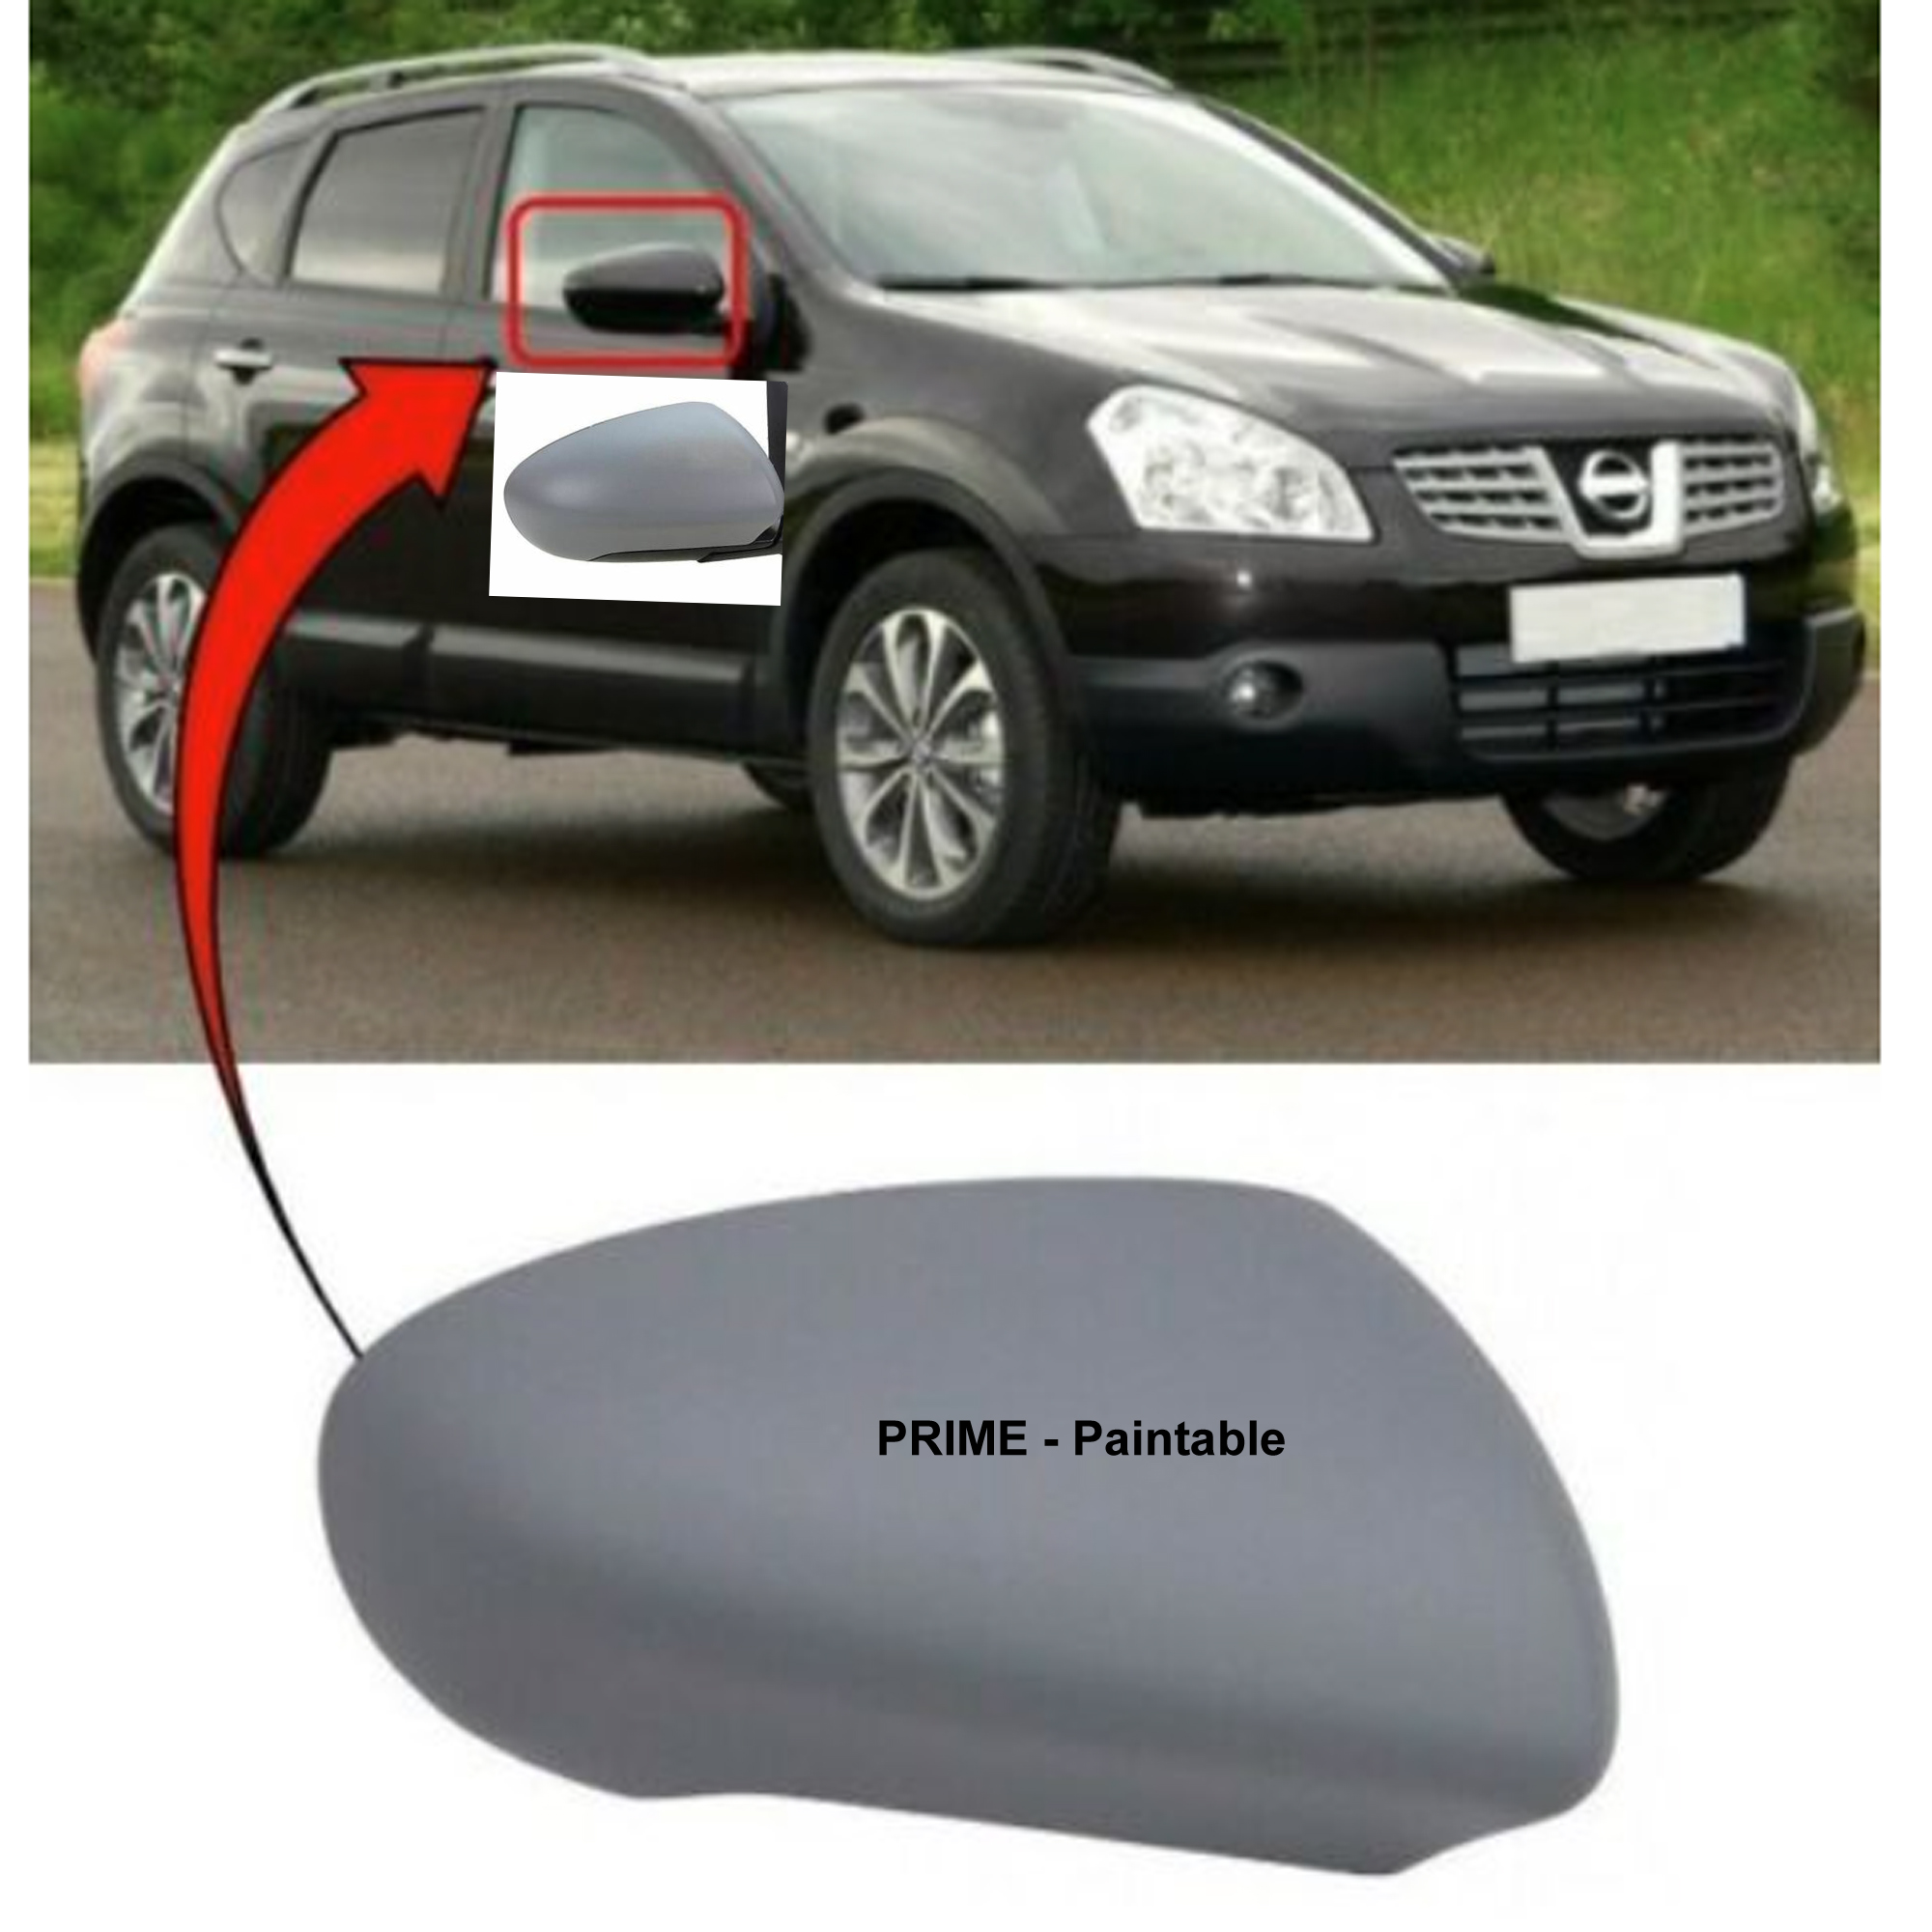 Nissan Qashqai Wing Mirror Cover RIGHT HAND ( UK Driver Side ) 2006 to 2013 – Wing Mirror Cover ( Primed – Paintable Fits for J10 Model )